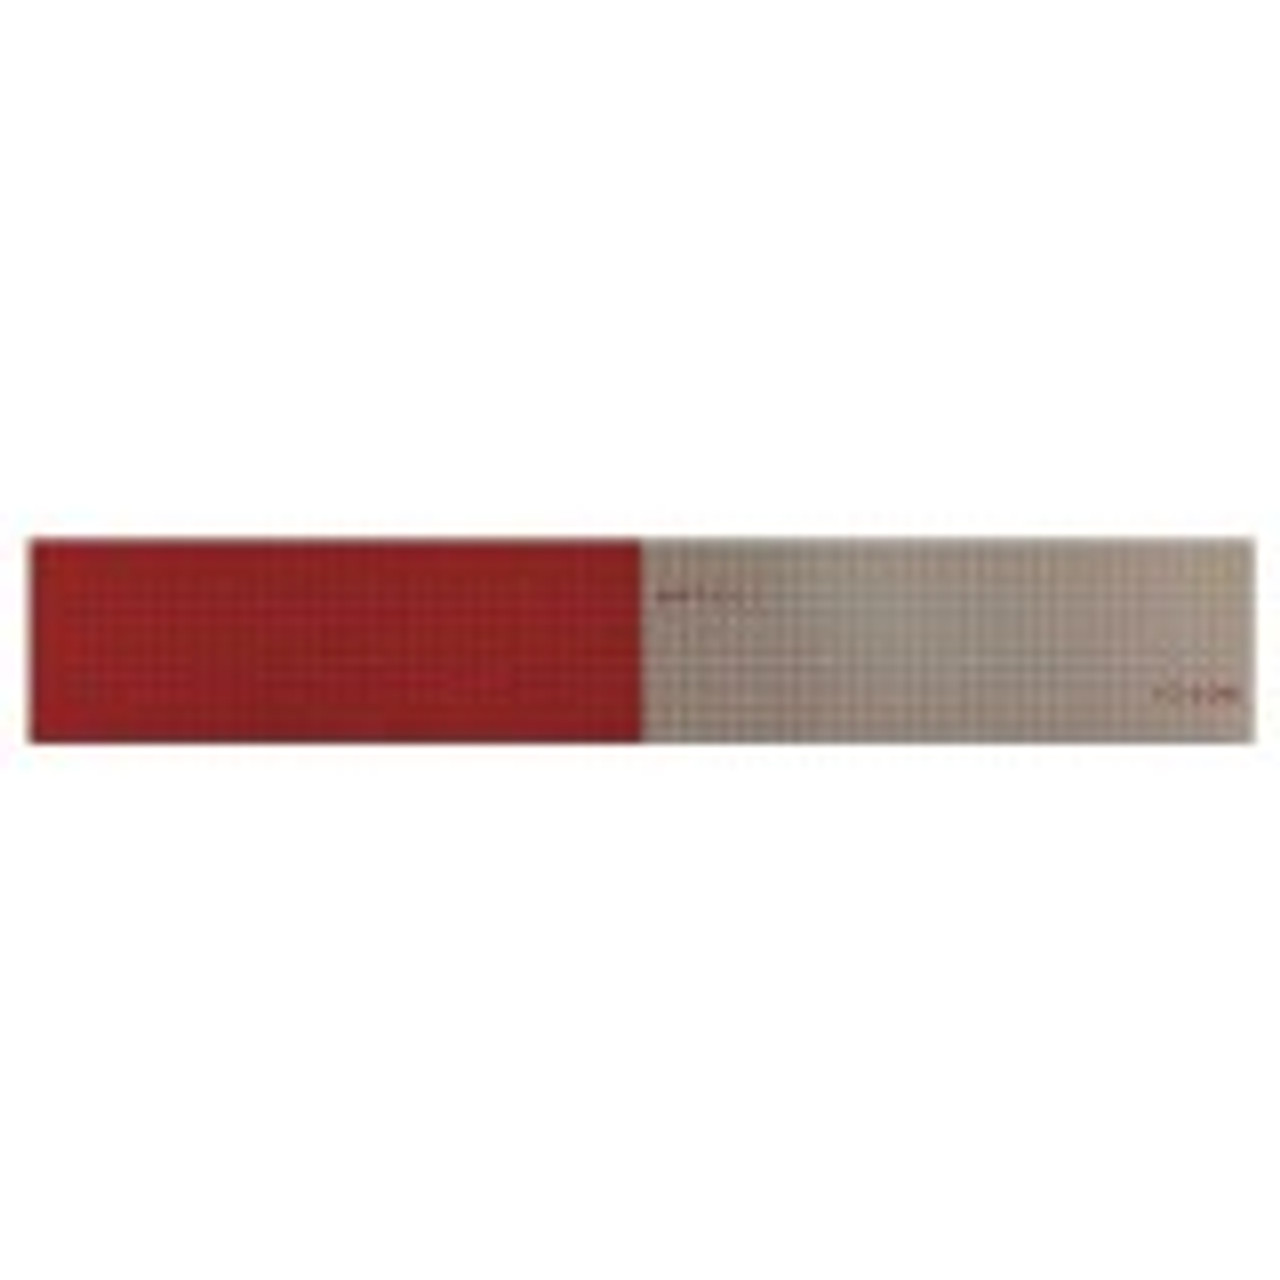 2 inch x 200Feet Reflective Safety Tape DOT-C2 200ft (6red,6white)